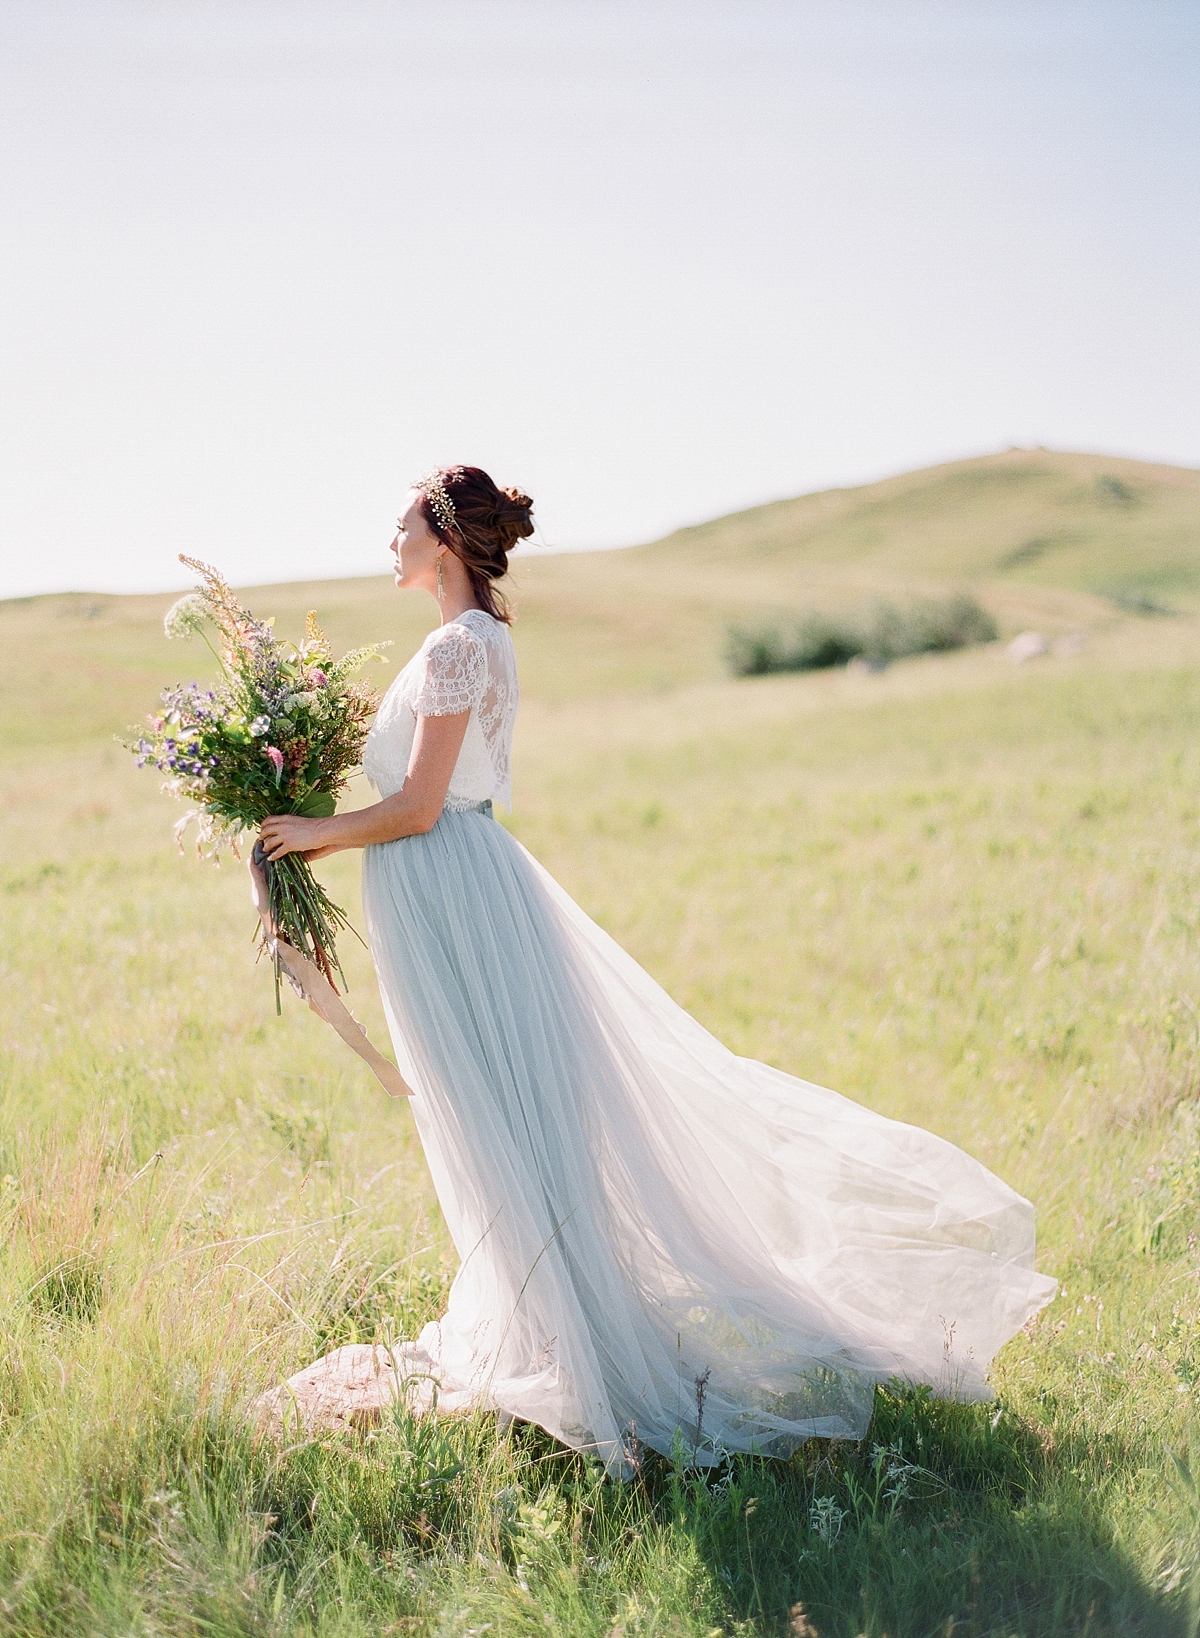 Whimsical Prairie Bride Wedding Inspiration / Film photography by Golden Veil Photography